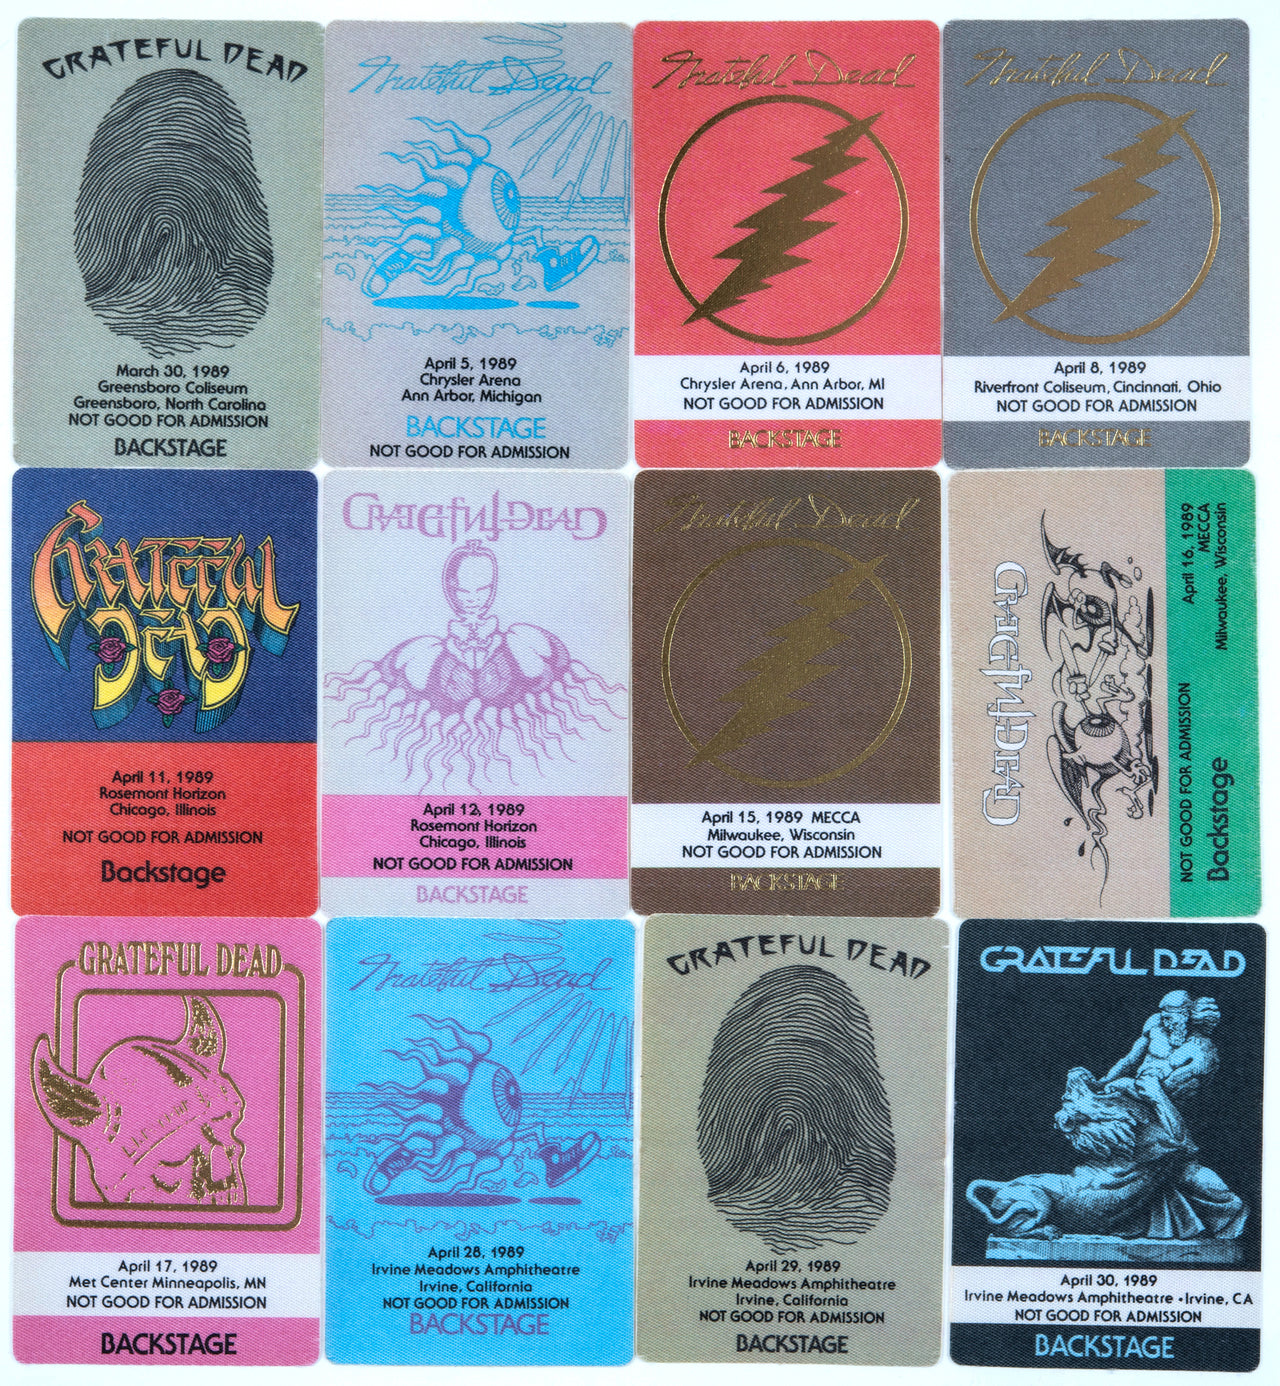 Grateful Dead Backstage Passes (3/30/1989 - 4/30/1989) from Dan Healy